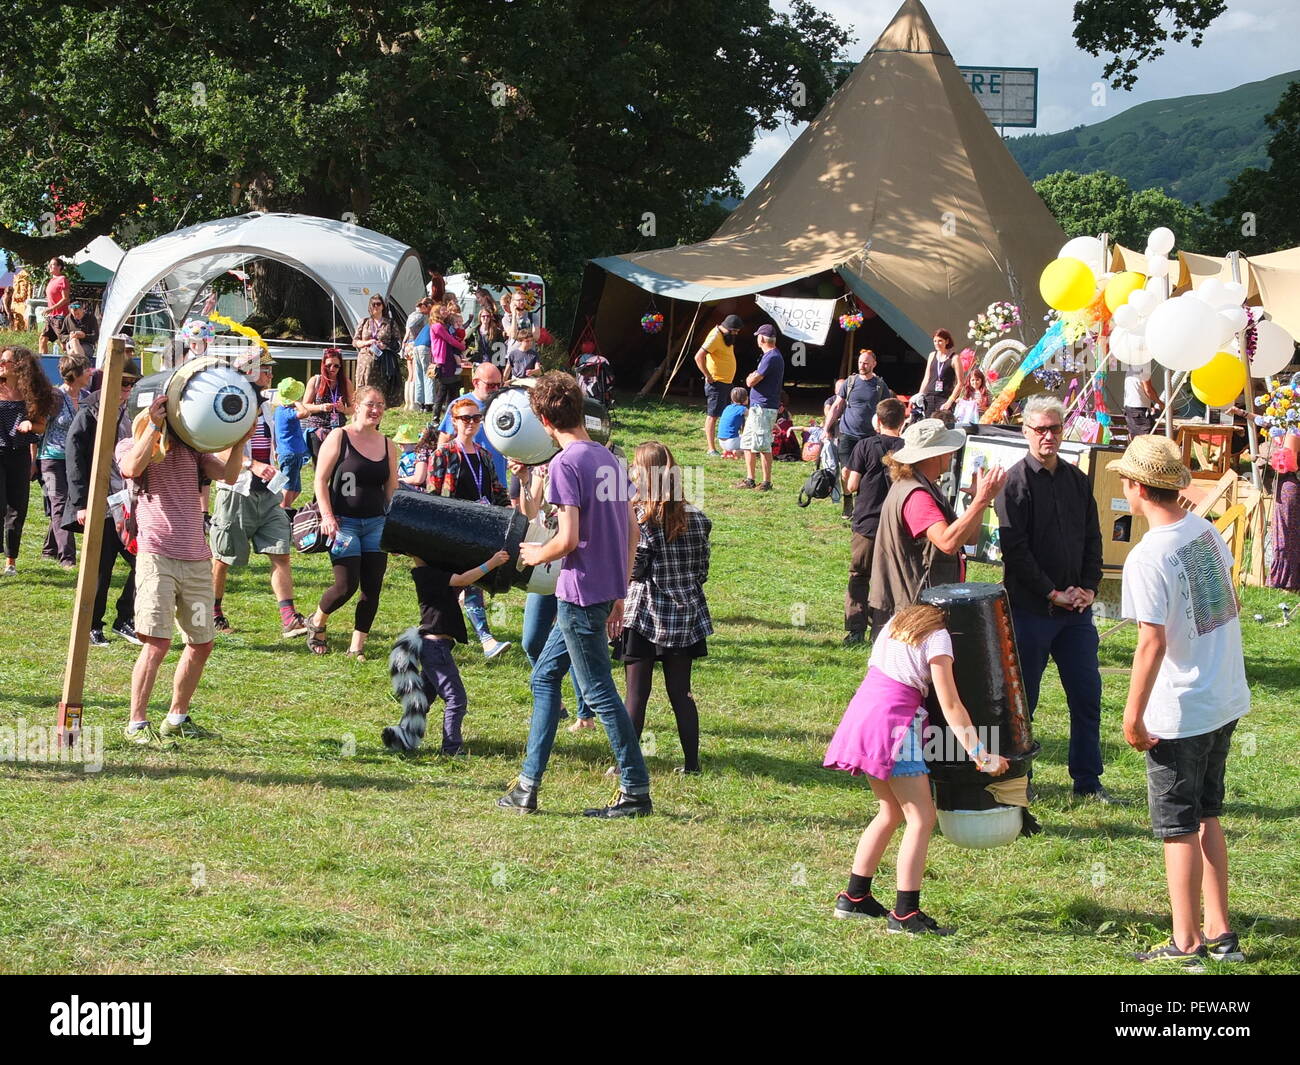 Green Man Festival, Wales. Festival goers tryng out 'eyescuras', wearable camera obscura devices Stock Photo